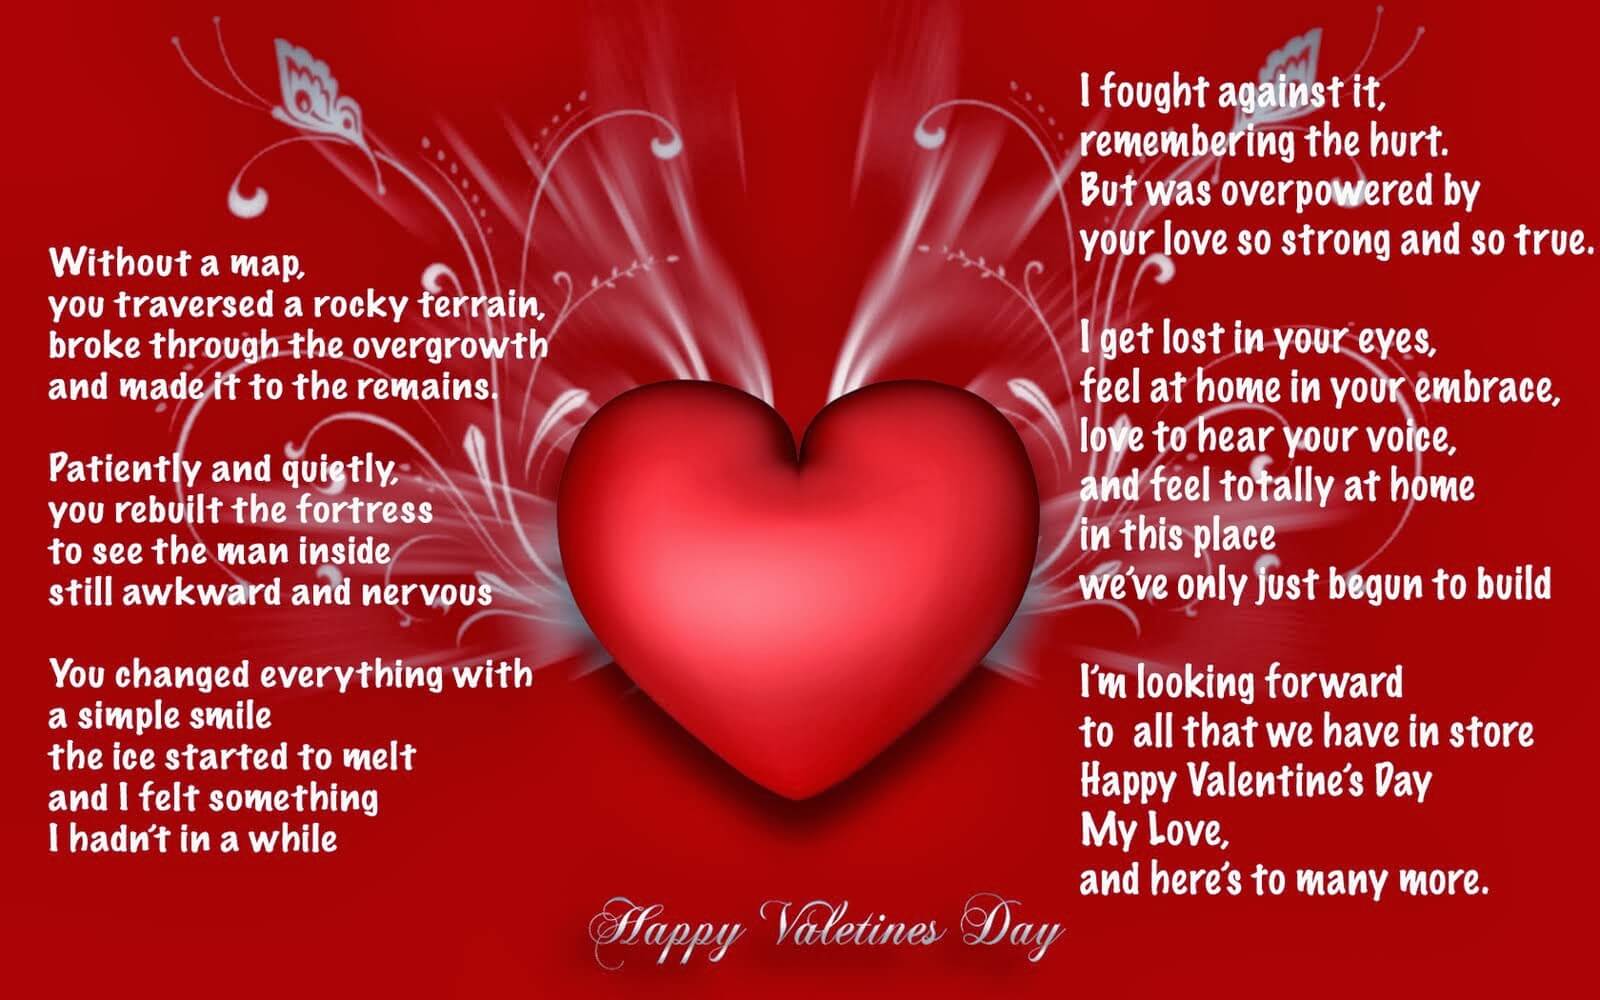 Unique Love Quotes For My Husband On Valentine's Day | Love Quotes Collection Within Hd Images